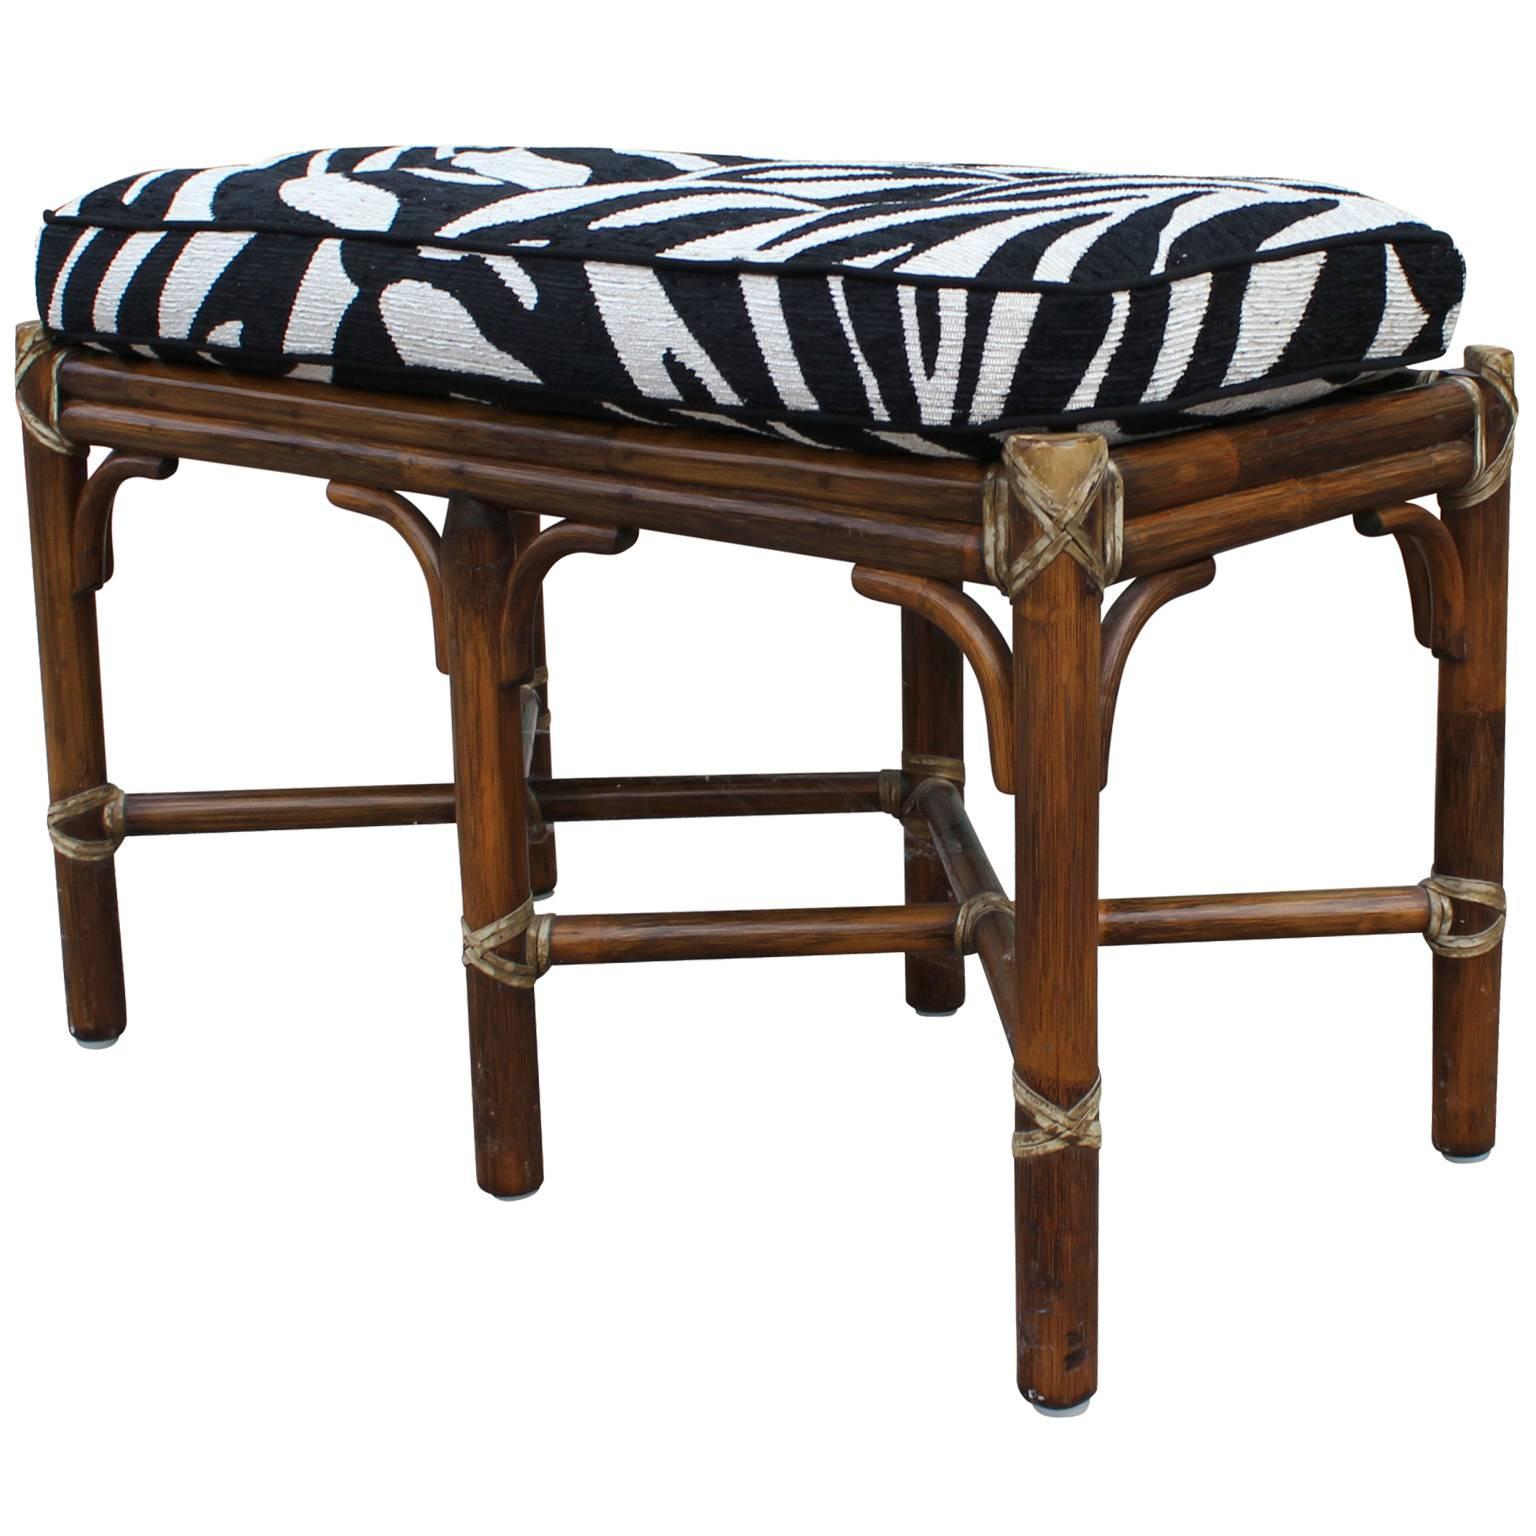 Great, small scale bamboo bench. Bamboo base is in excellent condition. Cushion is upholstered in a zebra print fabric which could use updating. 